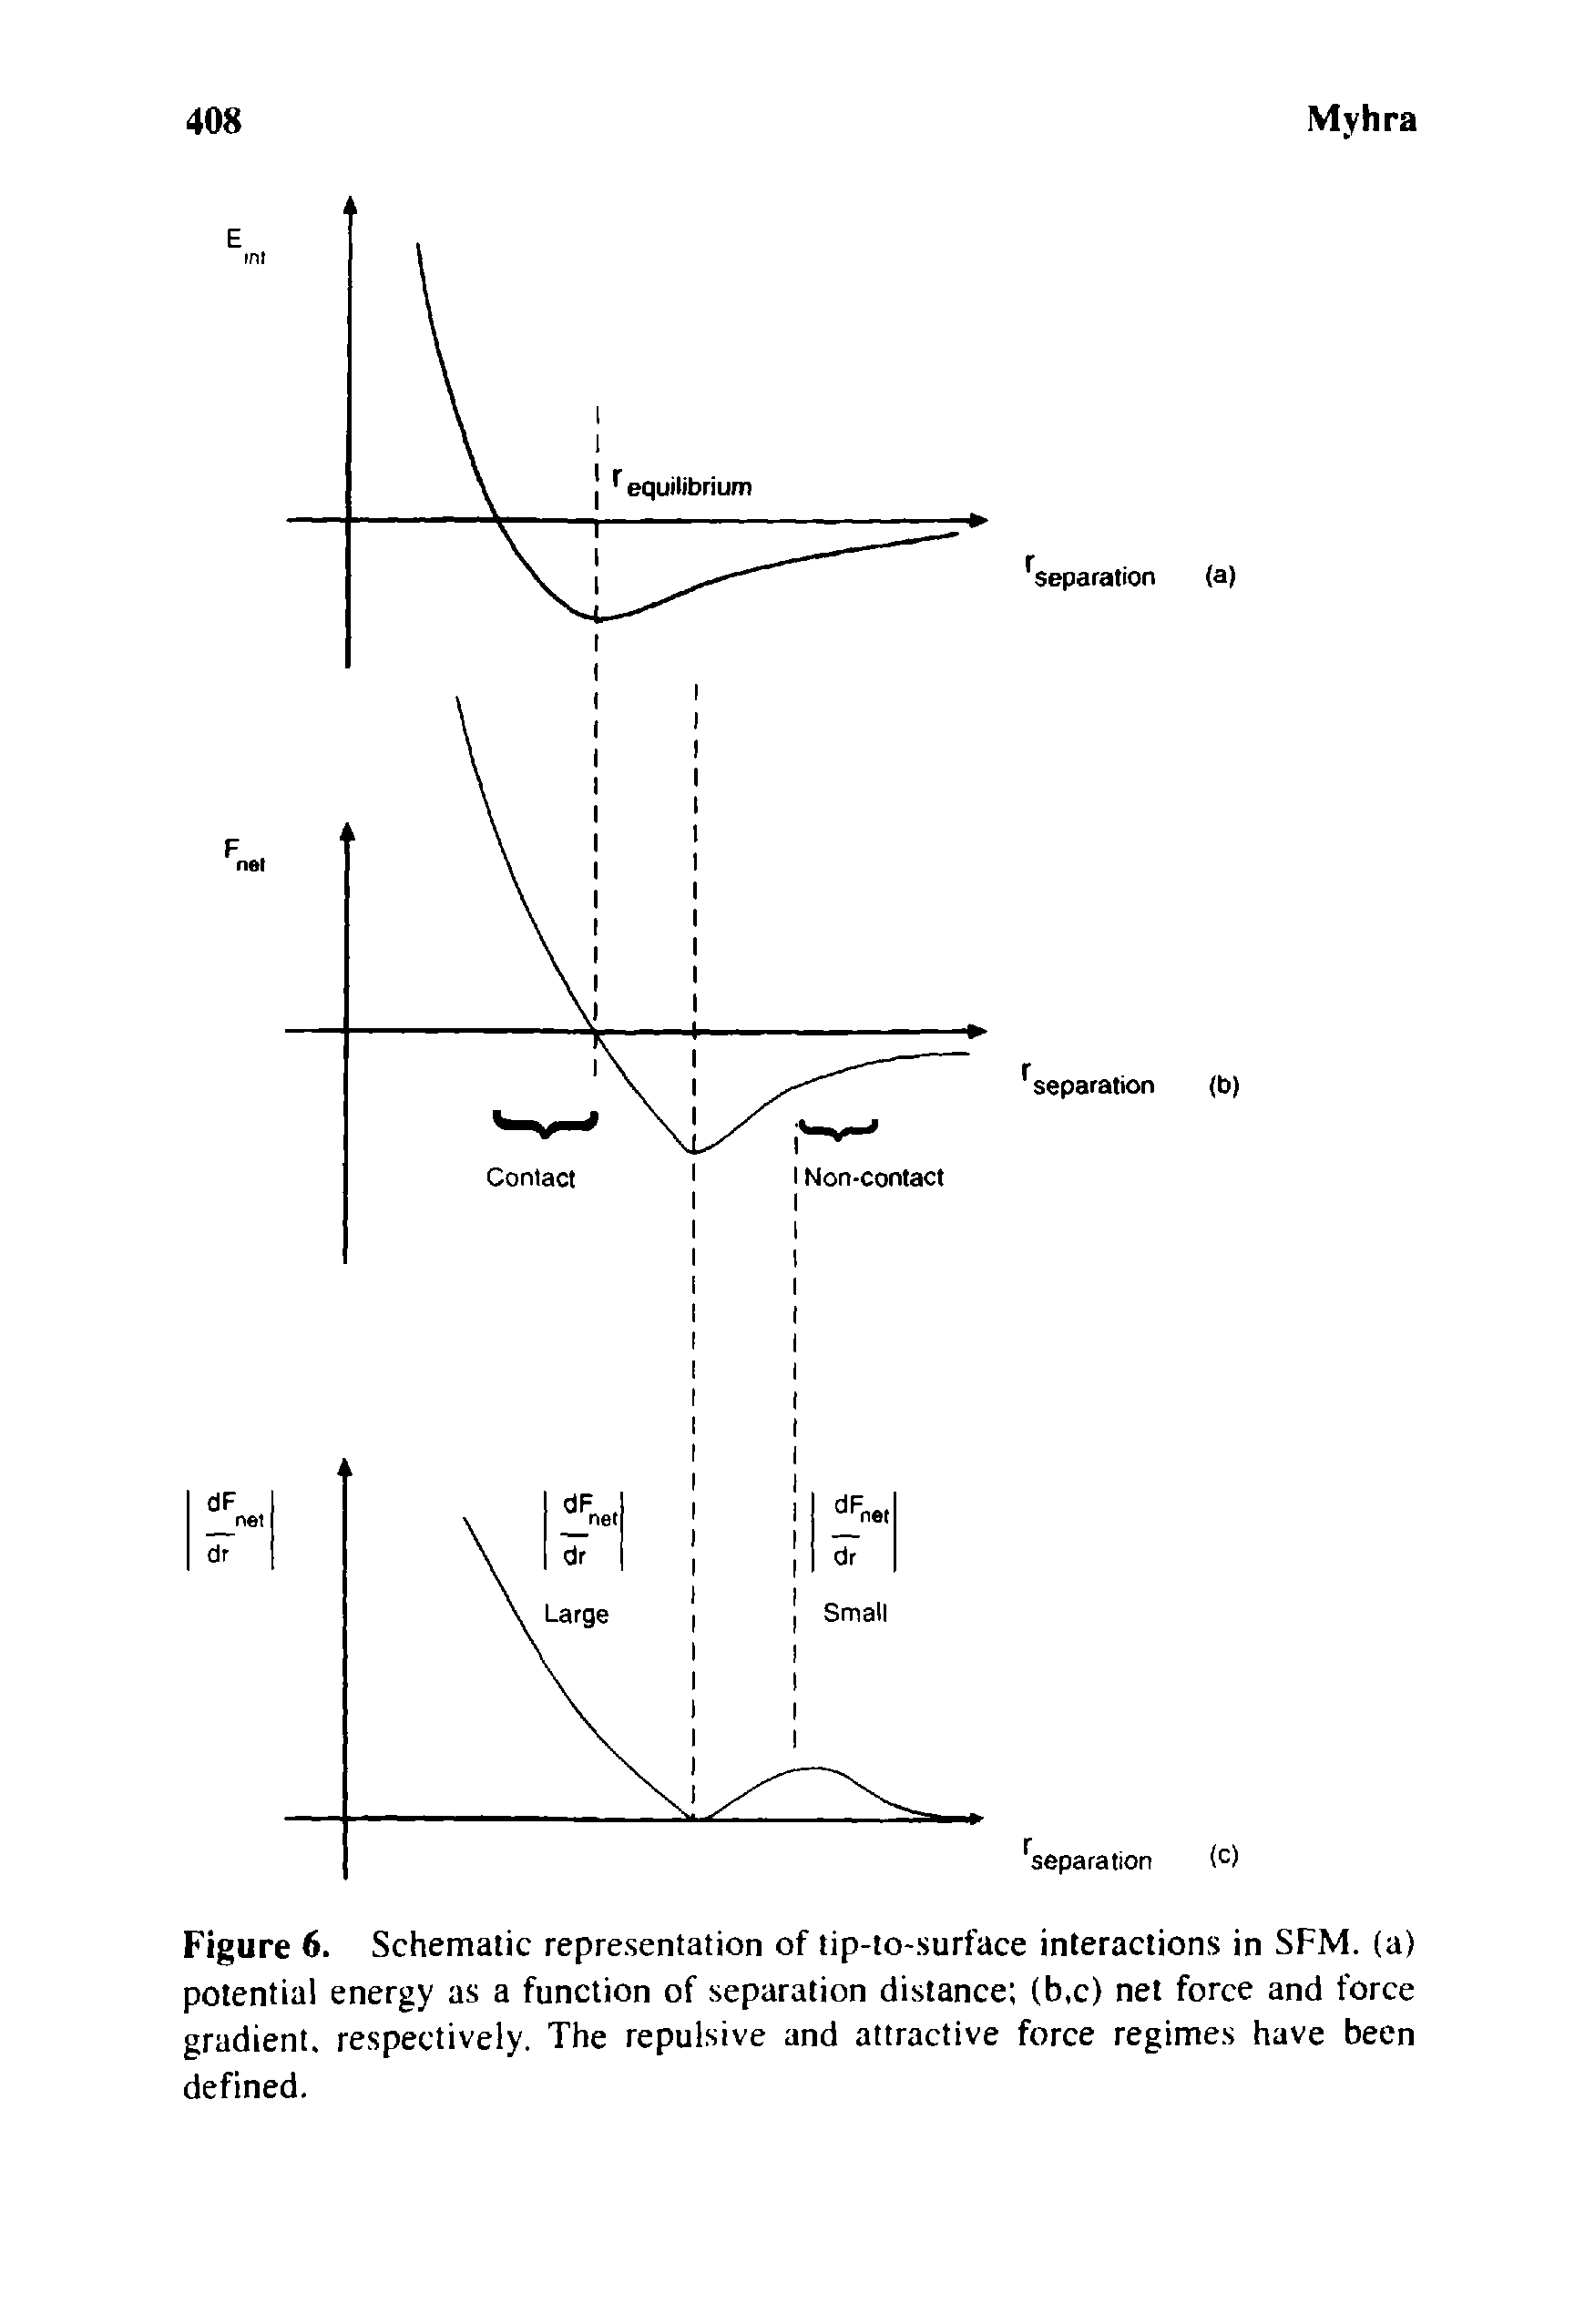 Figure 6. Schematic representation of tip-to-surface interactions in SFM. (a) potential energy as a function of separation distance (b,c) net force and force gradient, respectively. The repulsive and attractive force regimes have been defined.